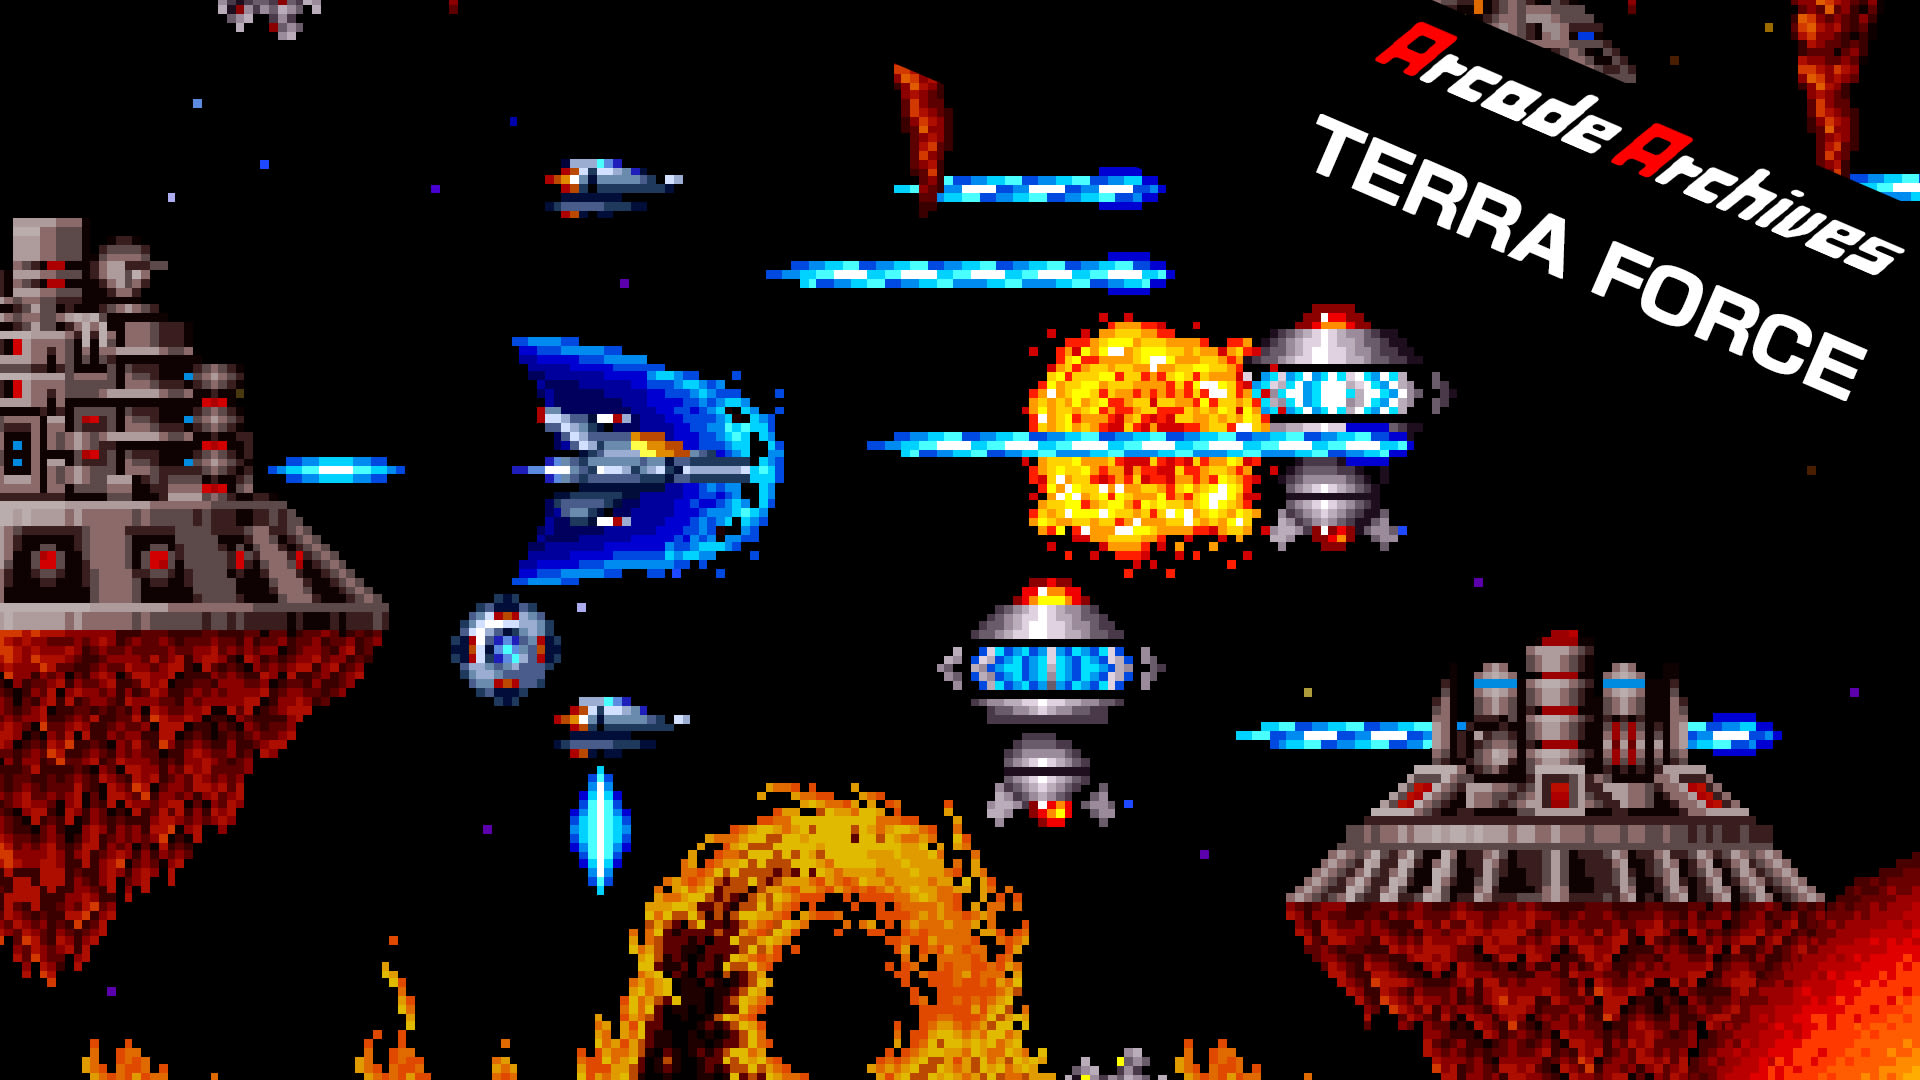 Arcade Archives TERRA FORCE 1